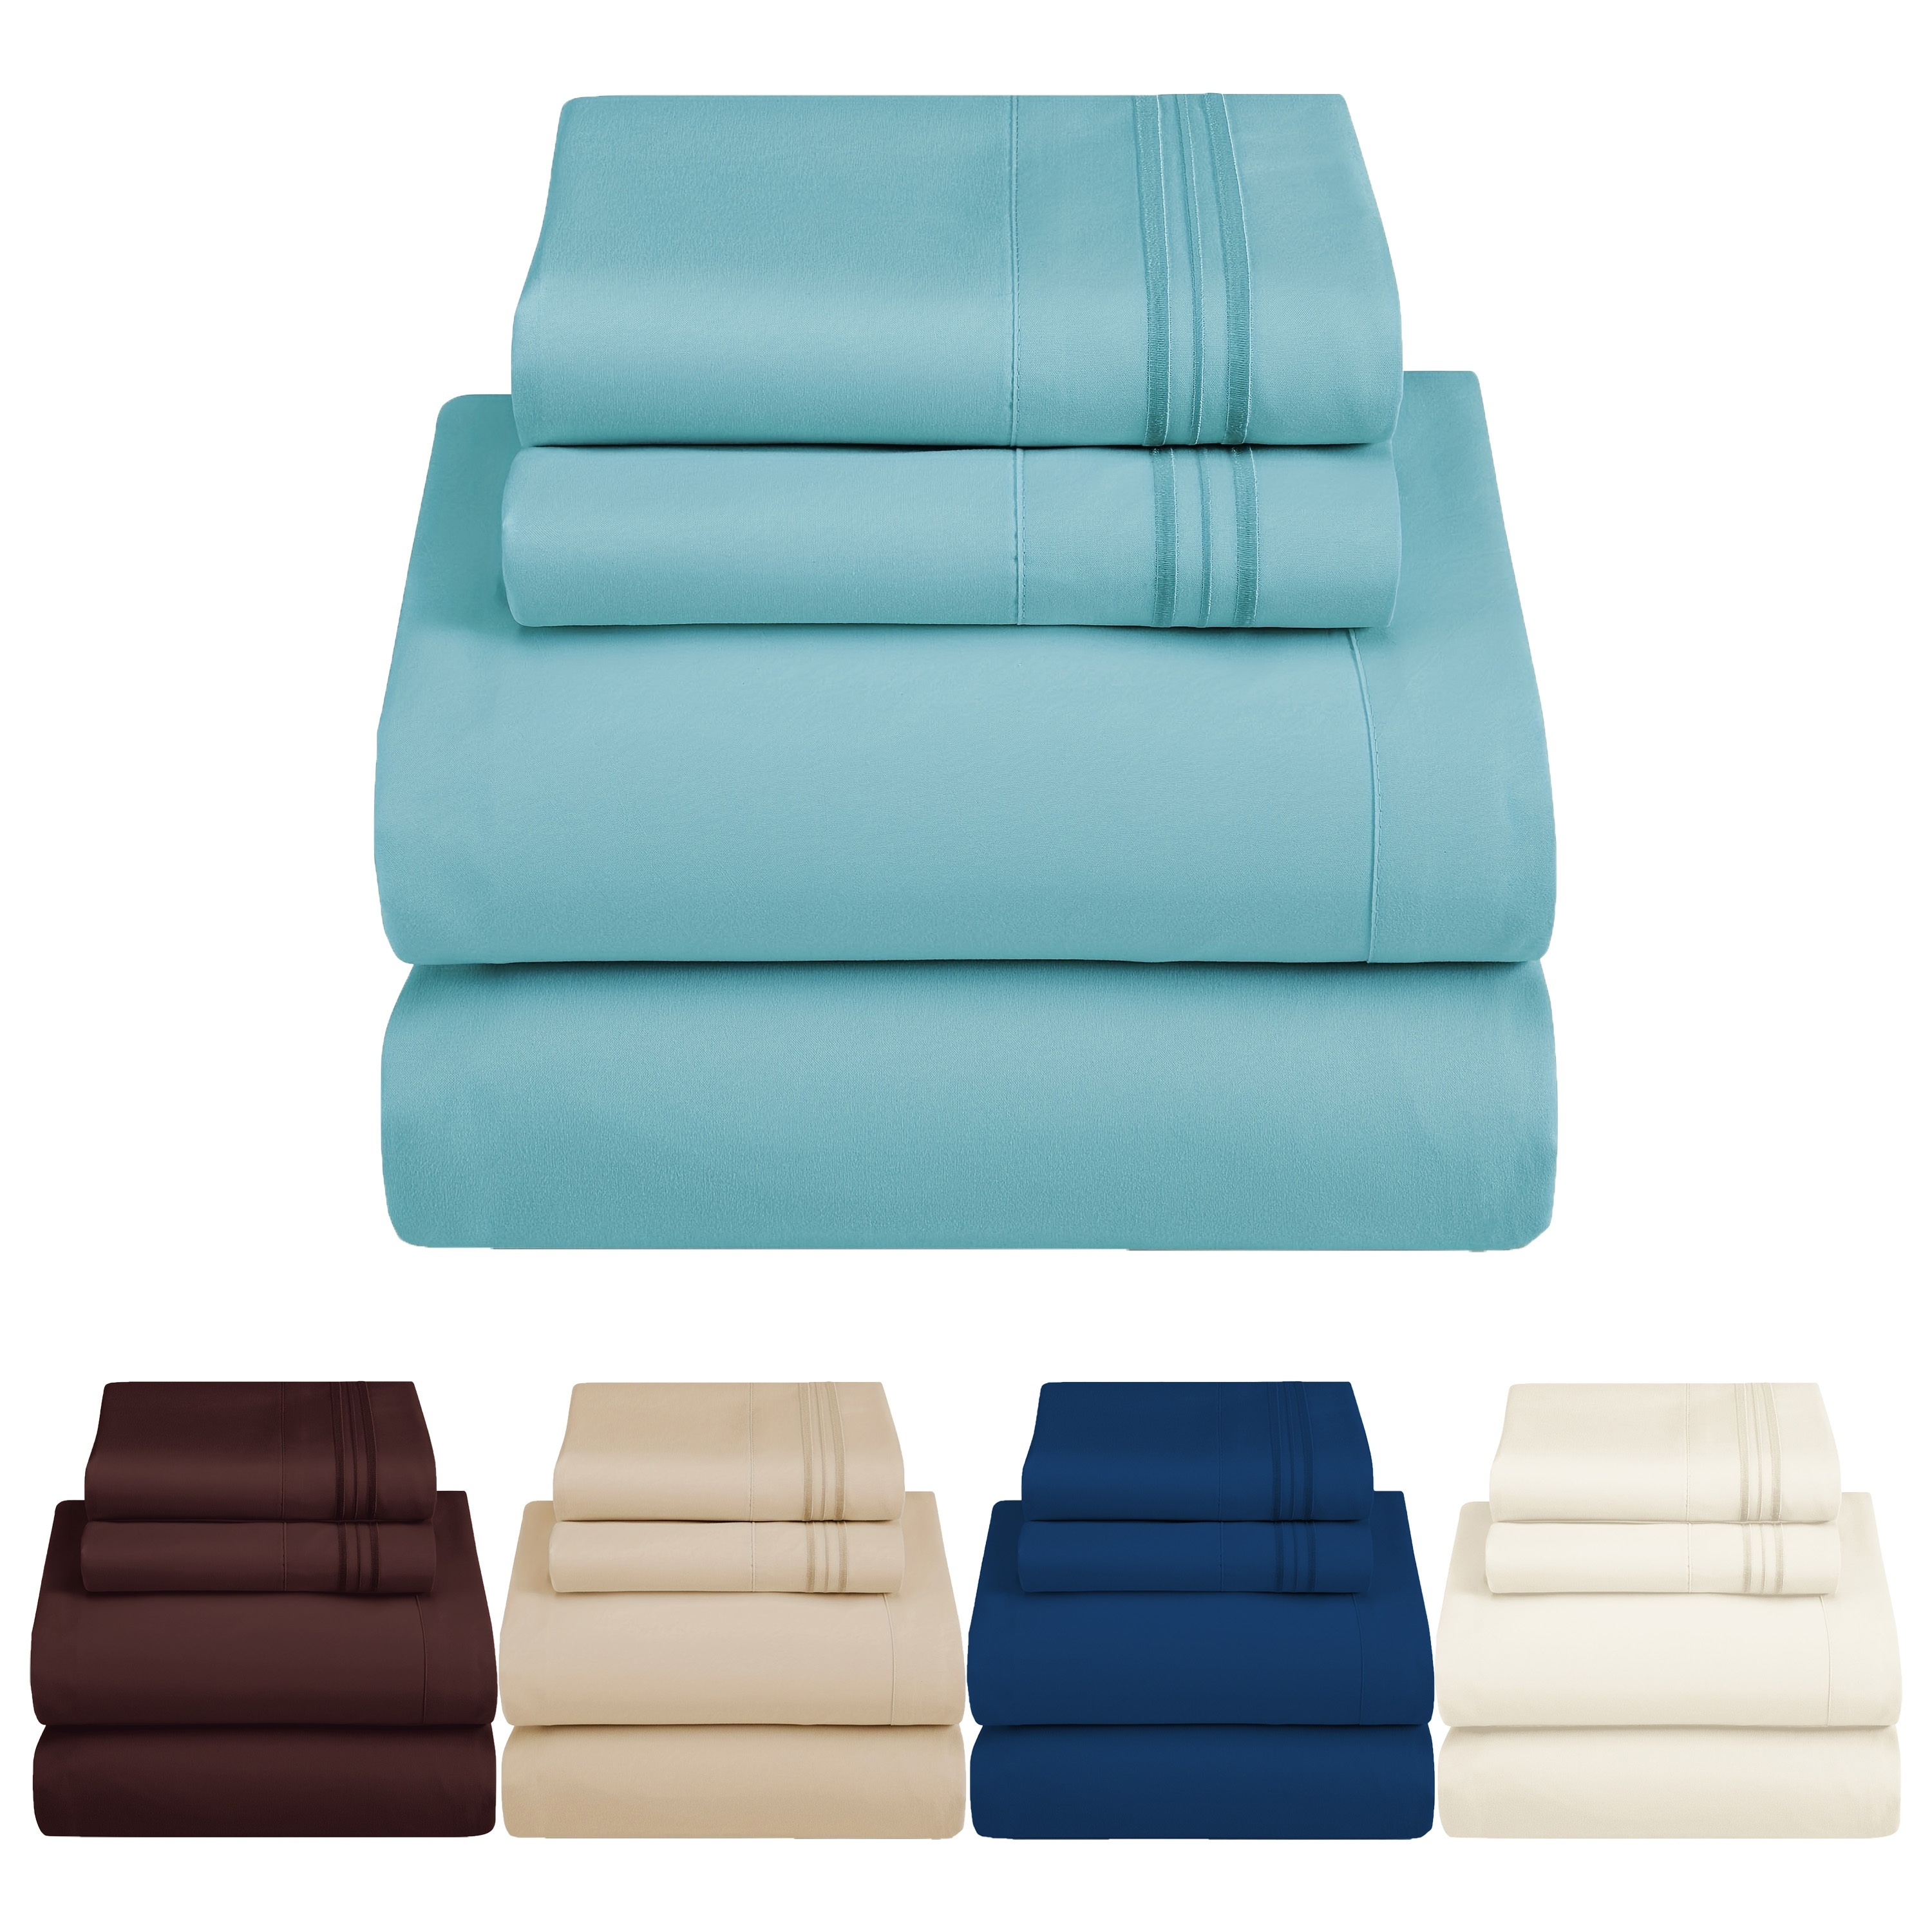 

3pcs/4pcs Fitted Sheet Set, Solid Color Bedding Set For Bedroom Guest Room Hotel ( 1*flat Sheet + 1*fitted Sheet + 1/2*pillowcase, Without Core)